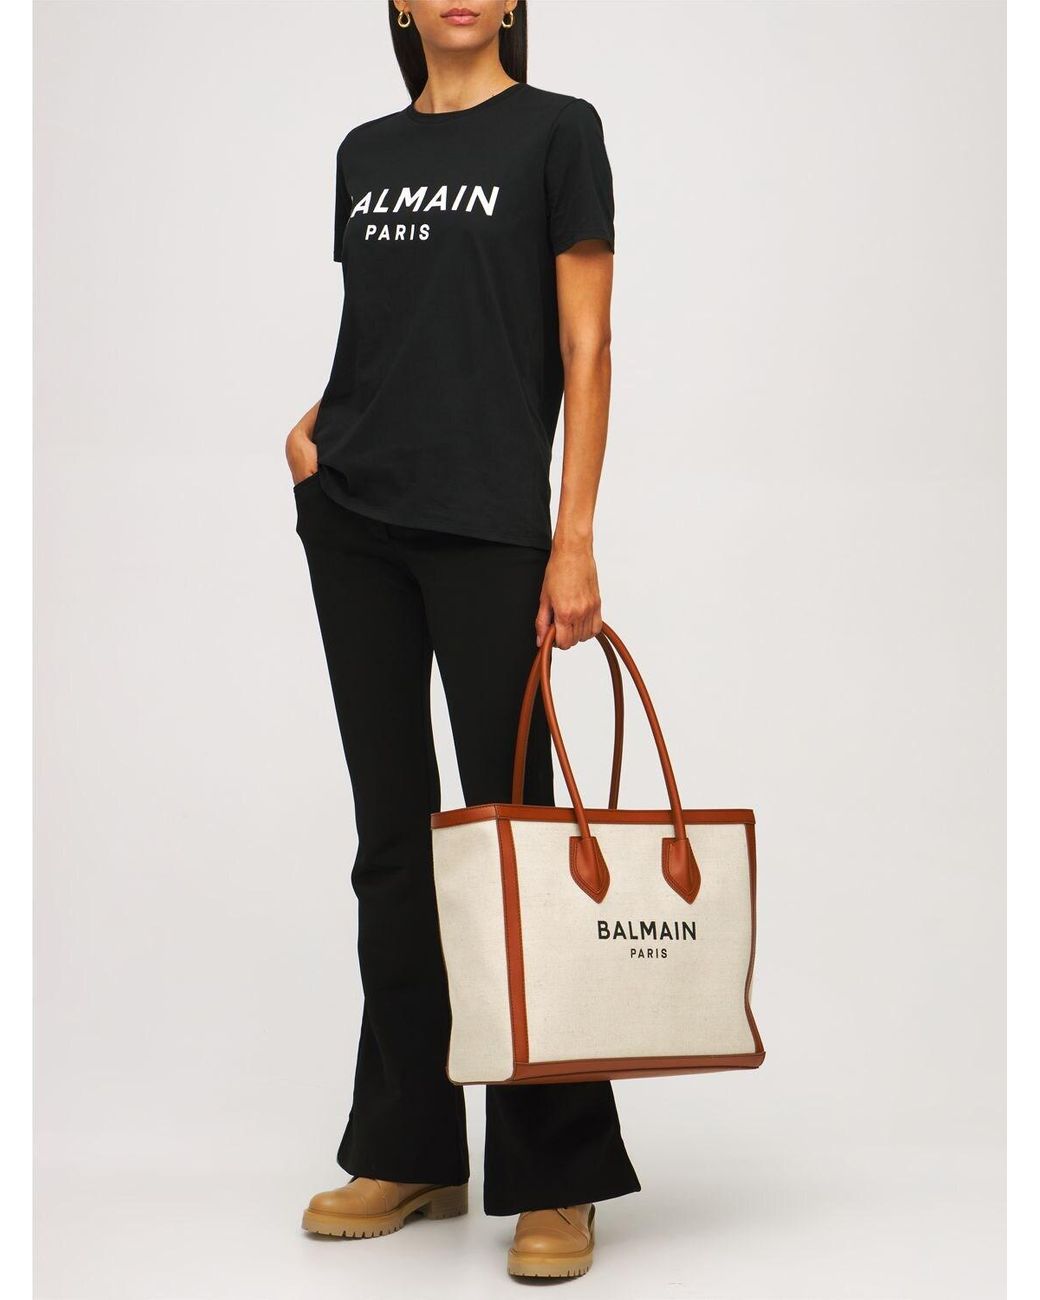 Balmain B-army 42 Canvas & Leather Tote in Natural - Lyst